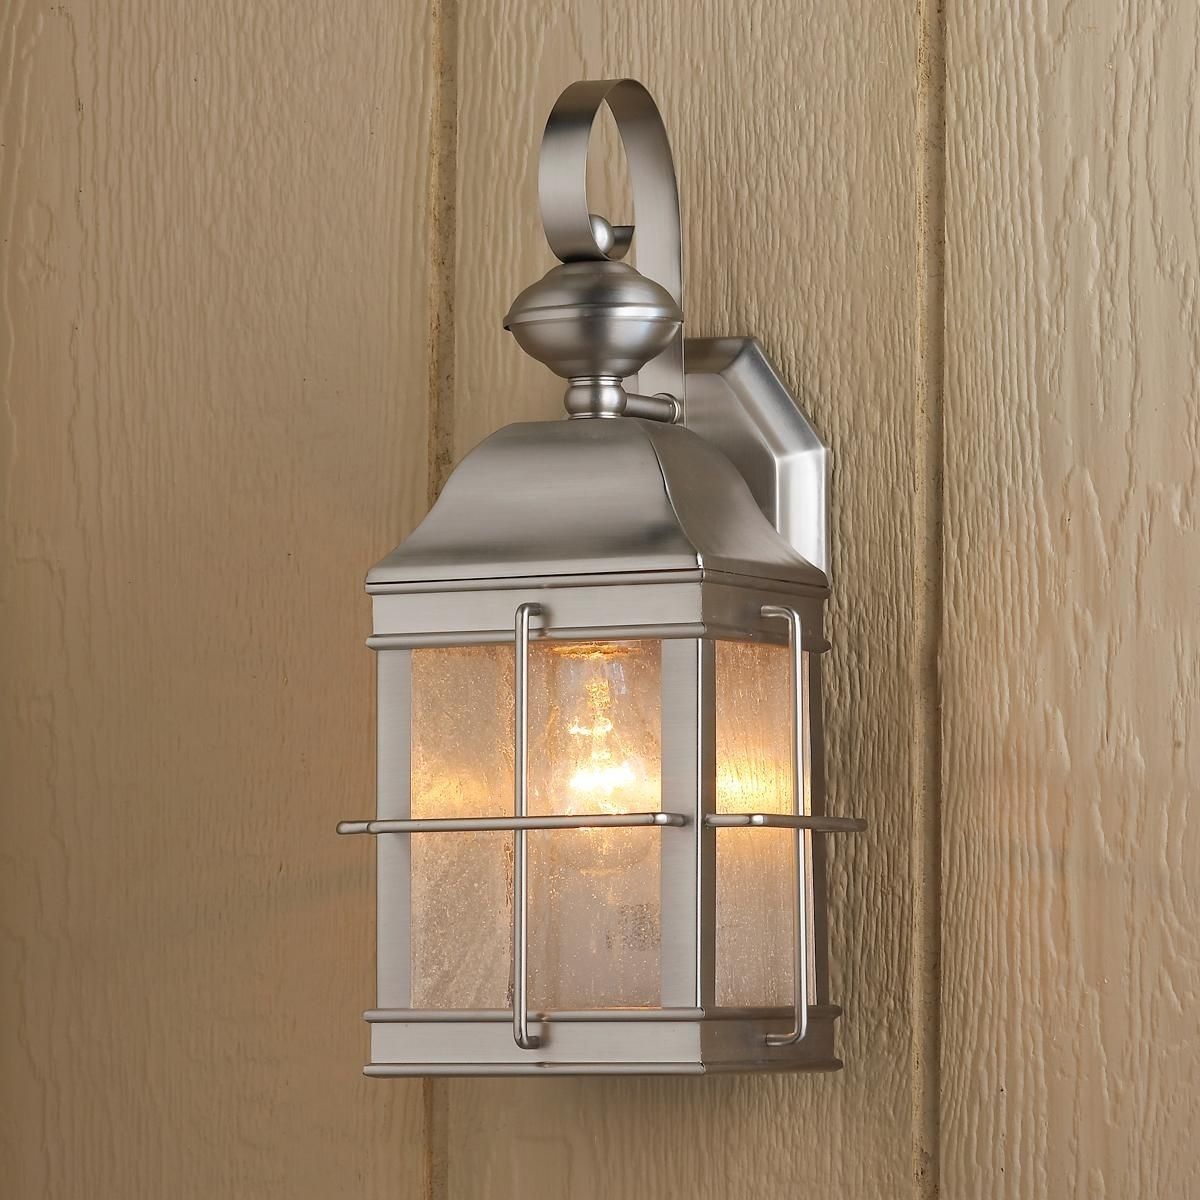 Nautical Inspired Lantern Outdoor Wall Light | Nautical Lanterns Within Outdoor Wall Lights For Coastal Areas (View 2 of 15)